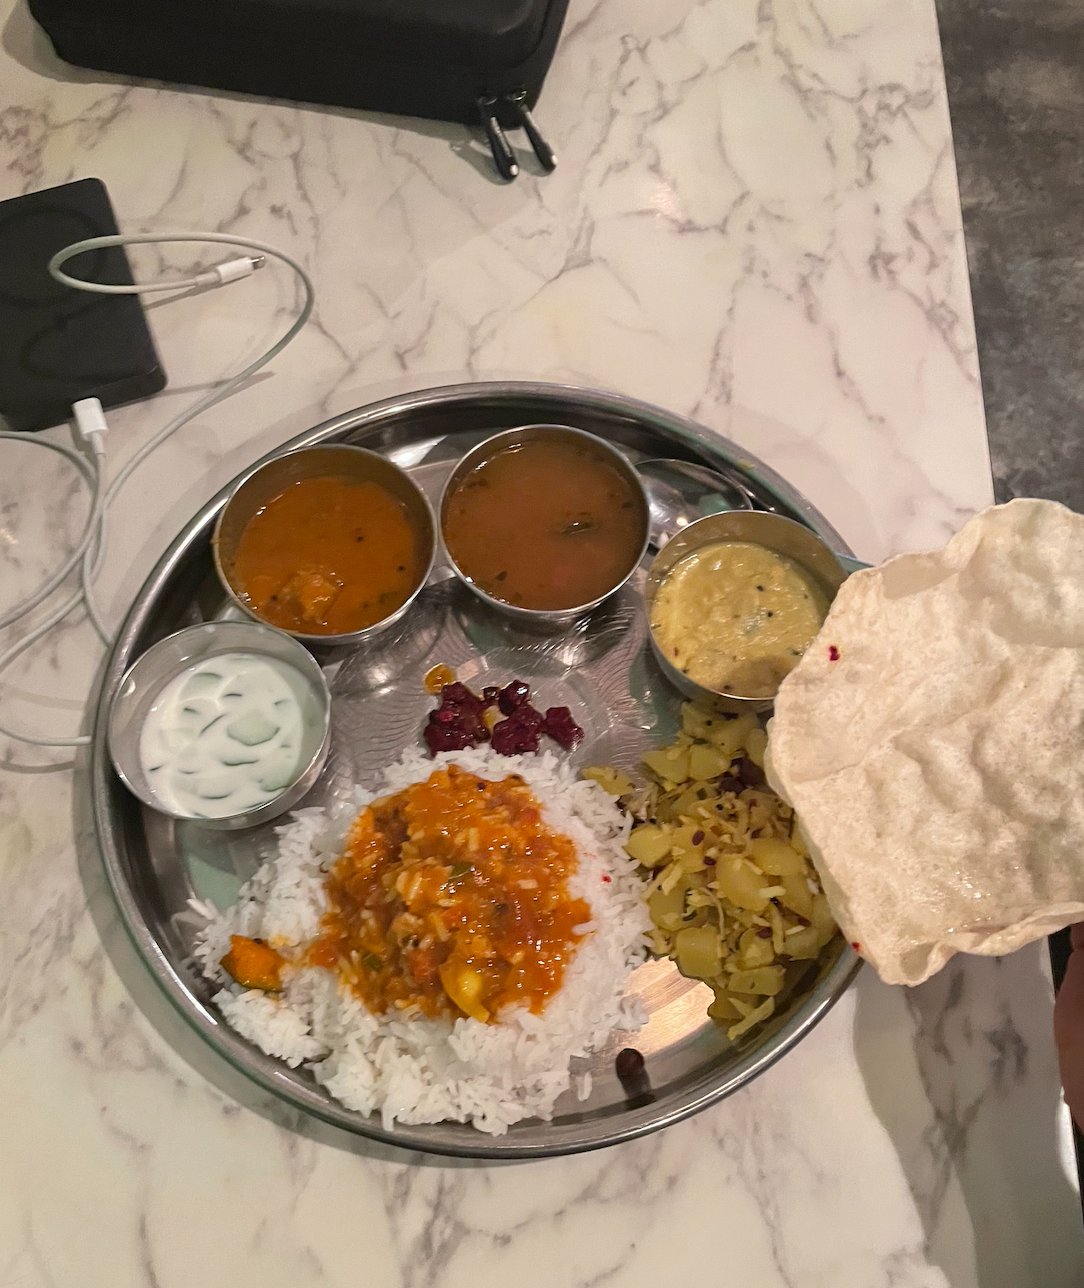 South Indian Restaurant In Japan Goes Viral